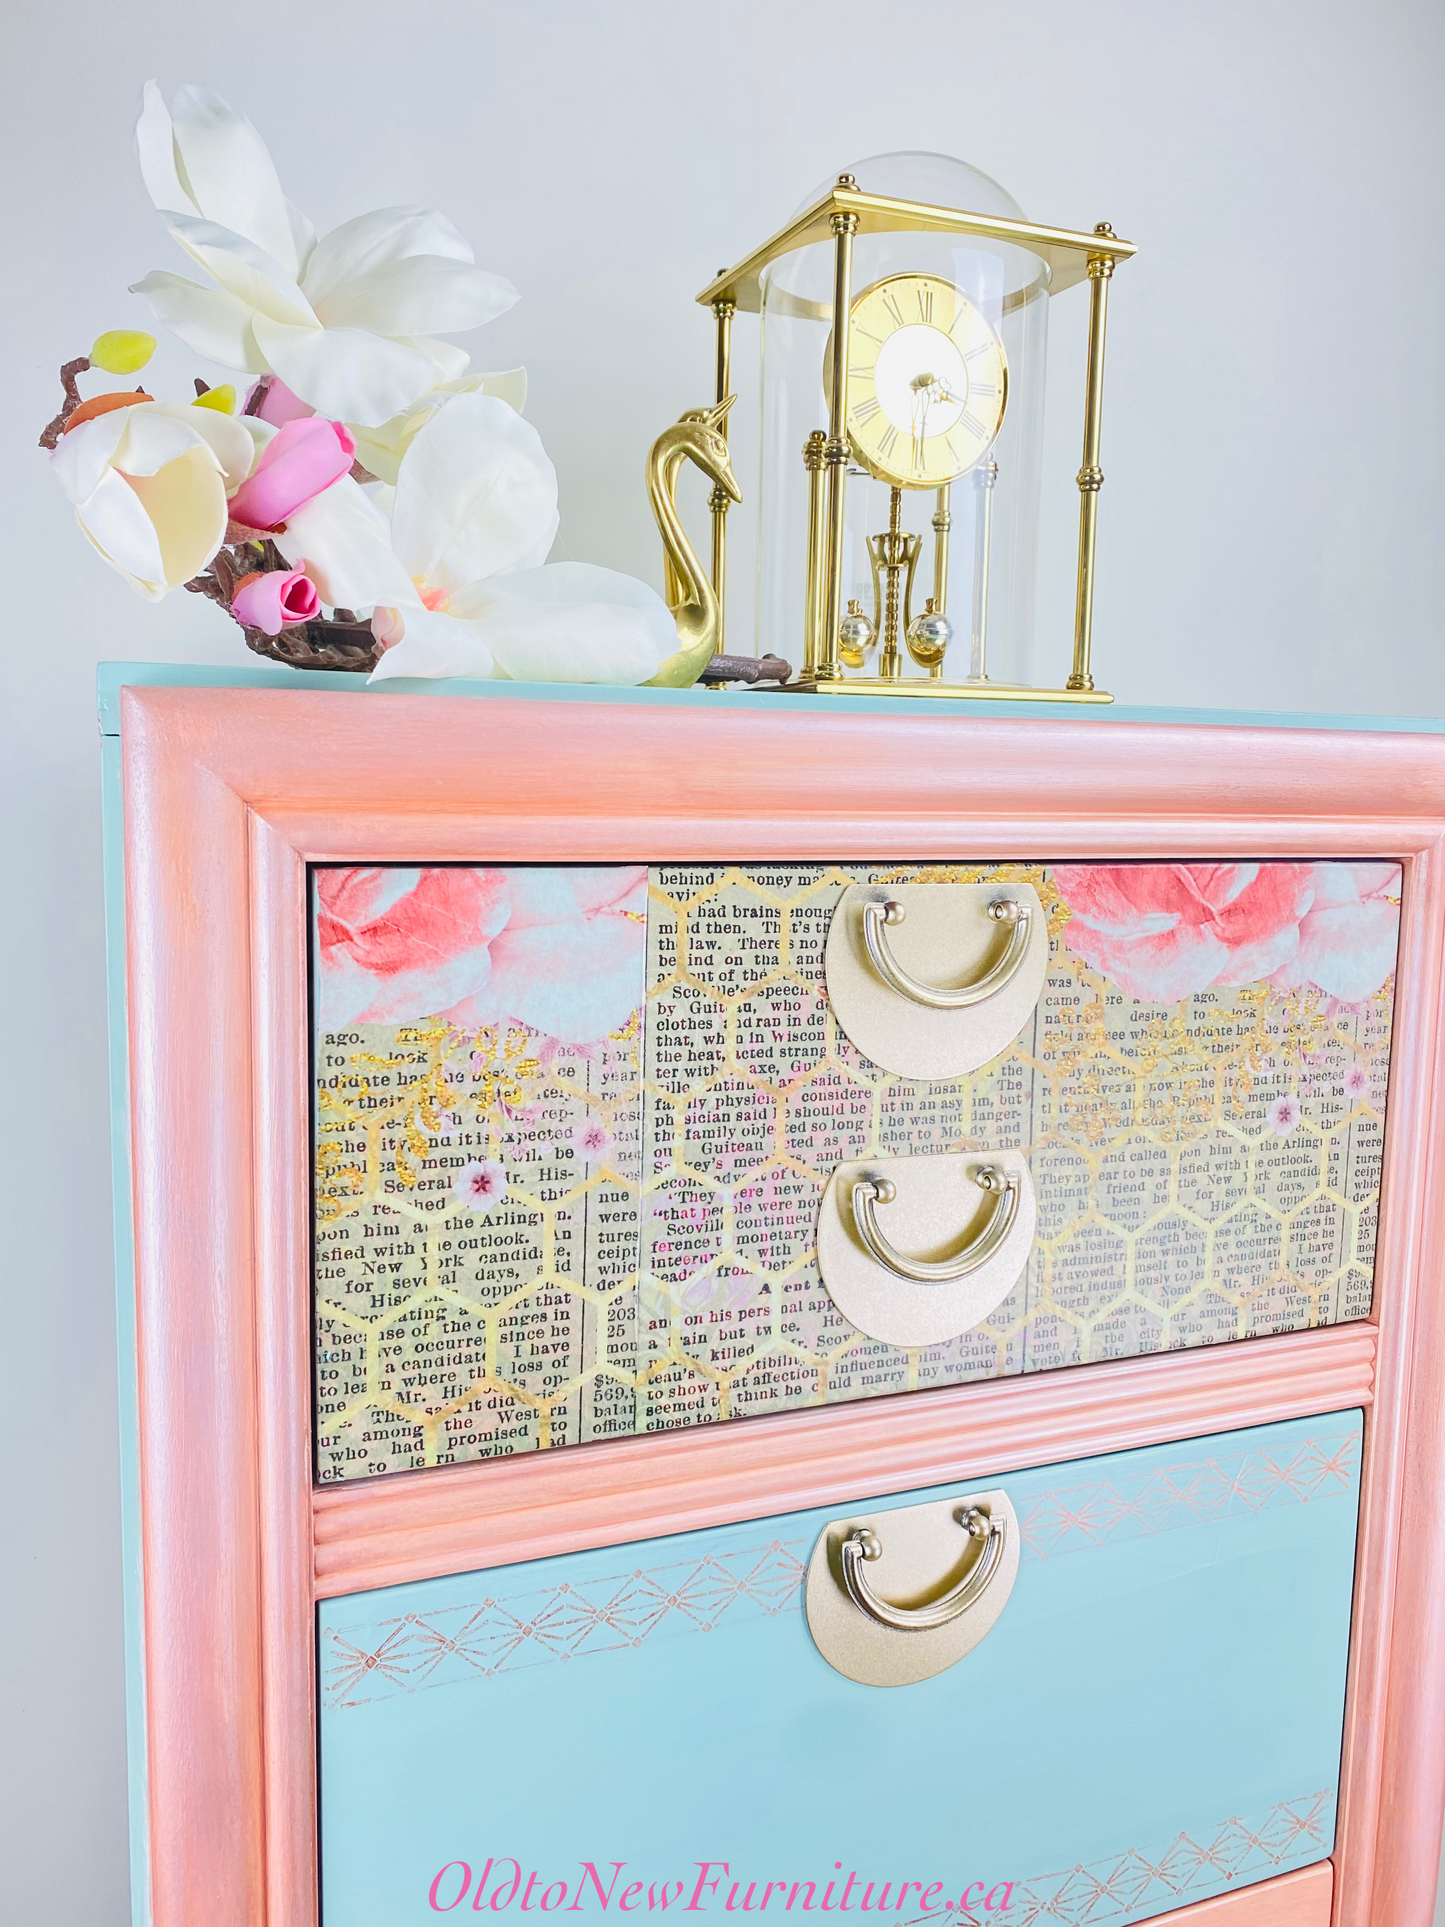 Gorgeous Kroehler Canada Antique 6 Drawer Lingerie Dresser Painted Teal with Metallic Copper, Pink Tones and Decoupaged.